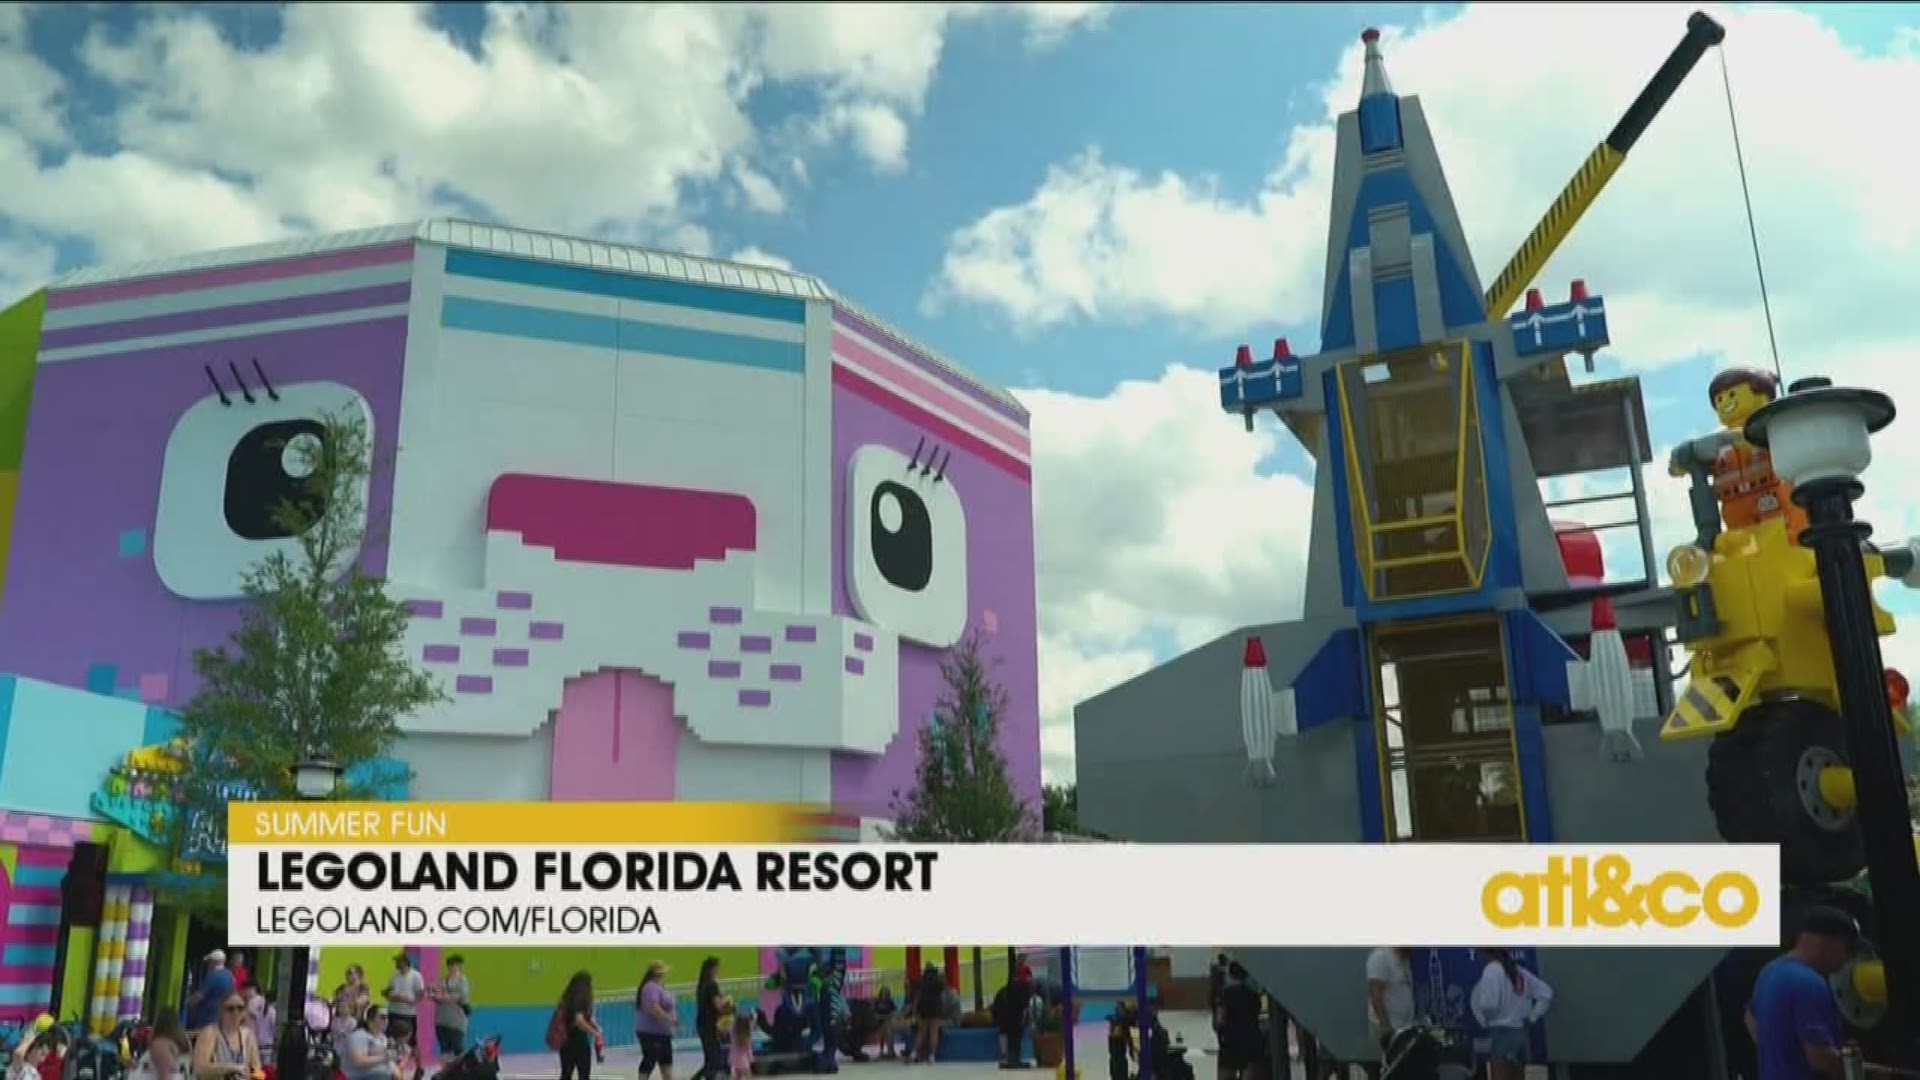 Take the whole family to LEGOLAND Florida Resort this summer!